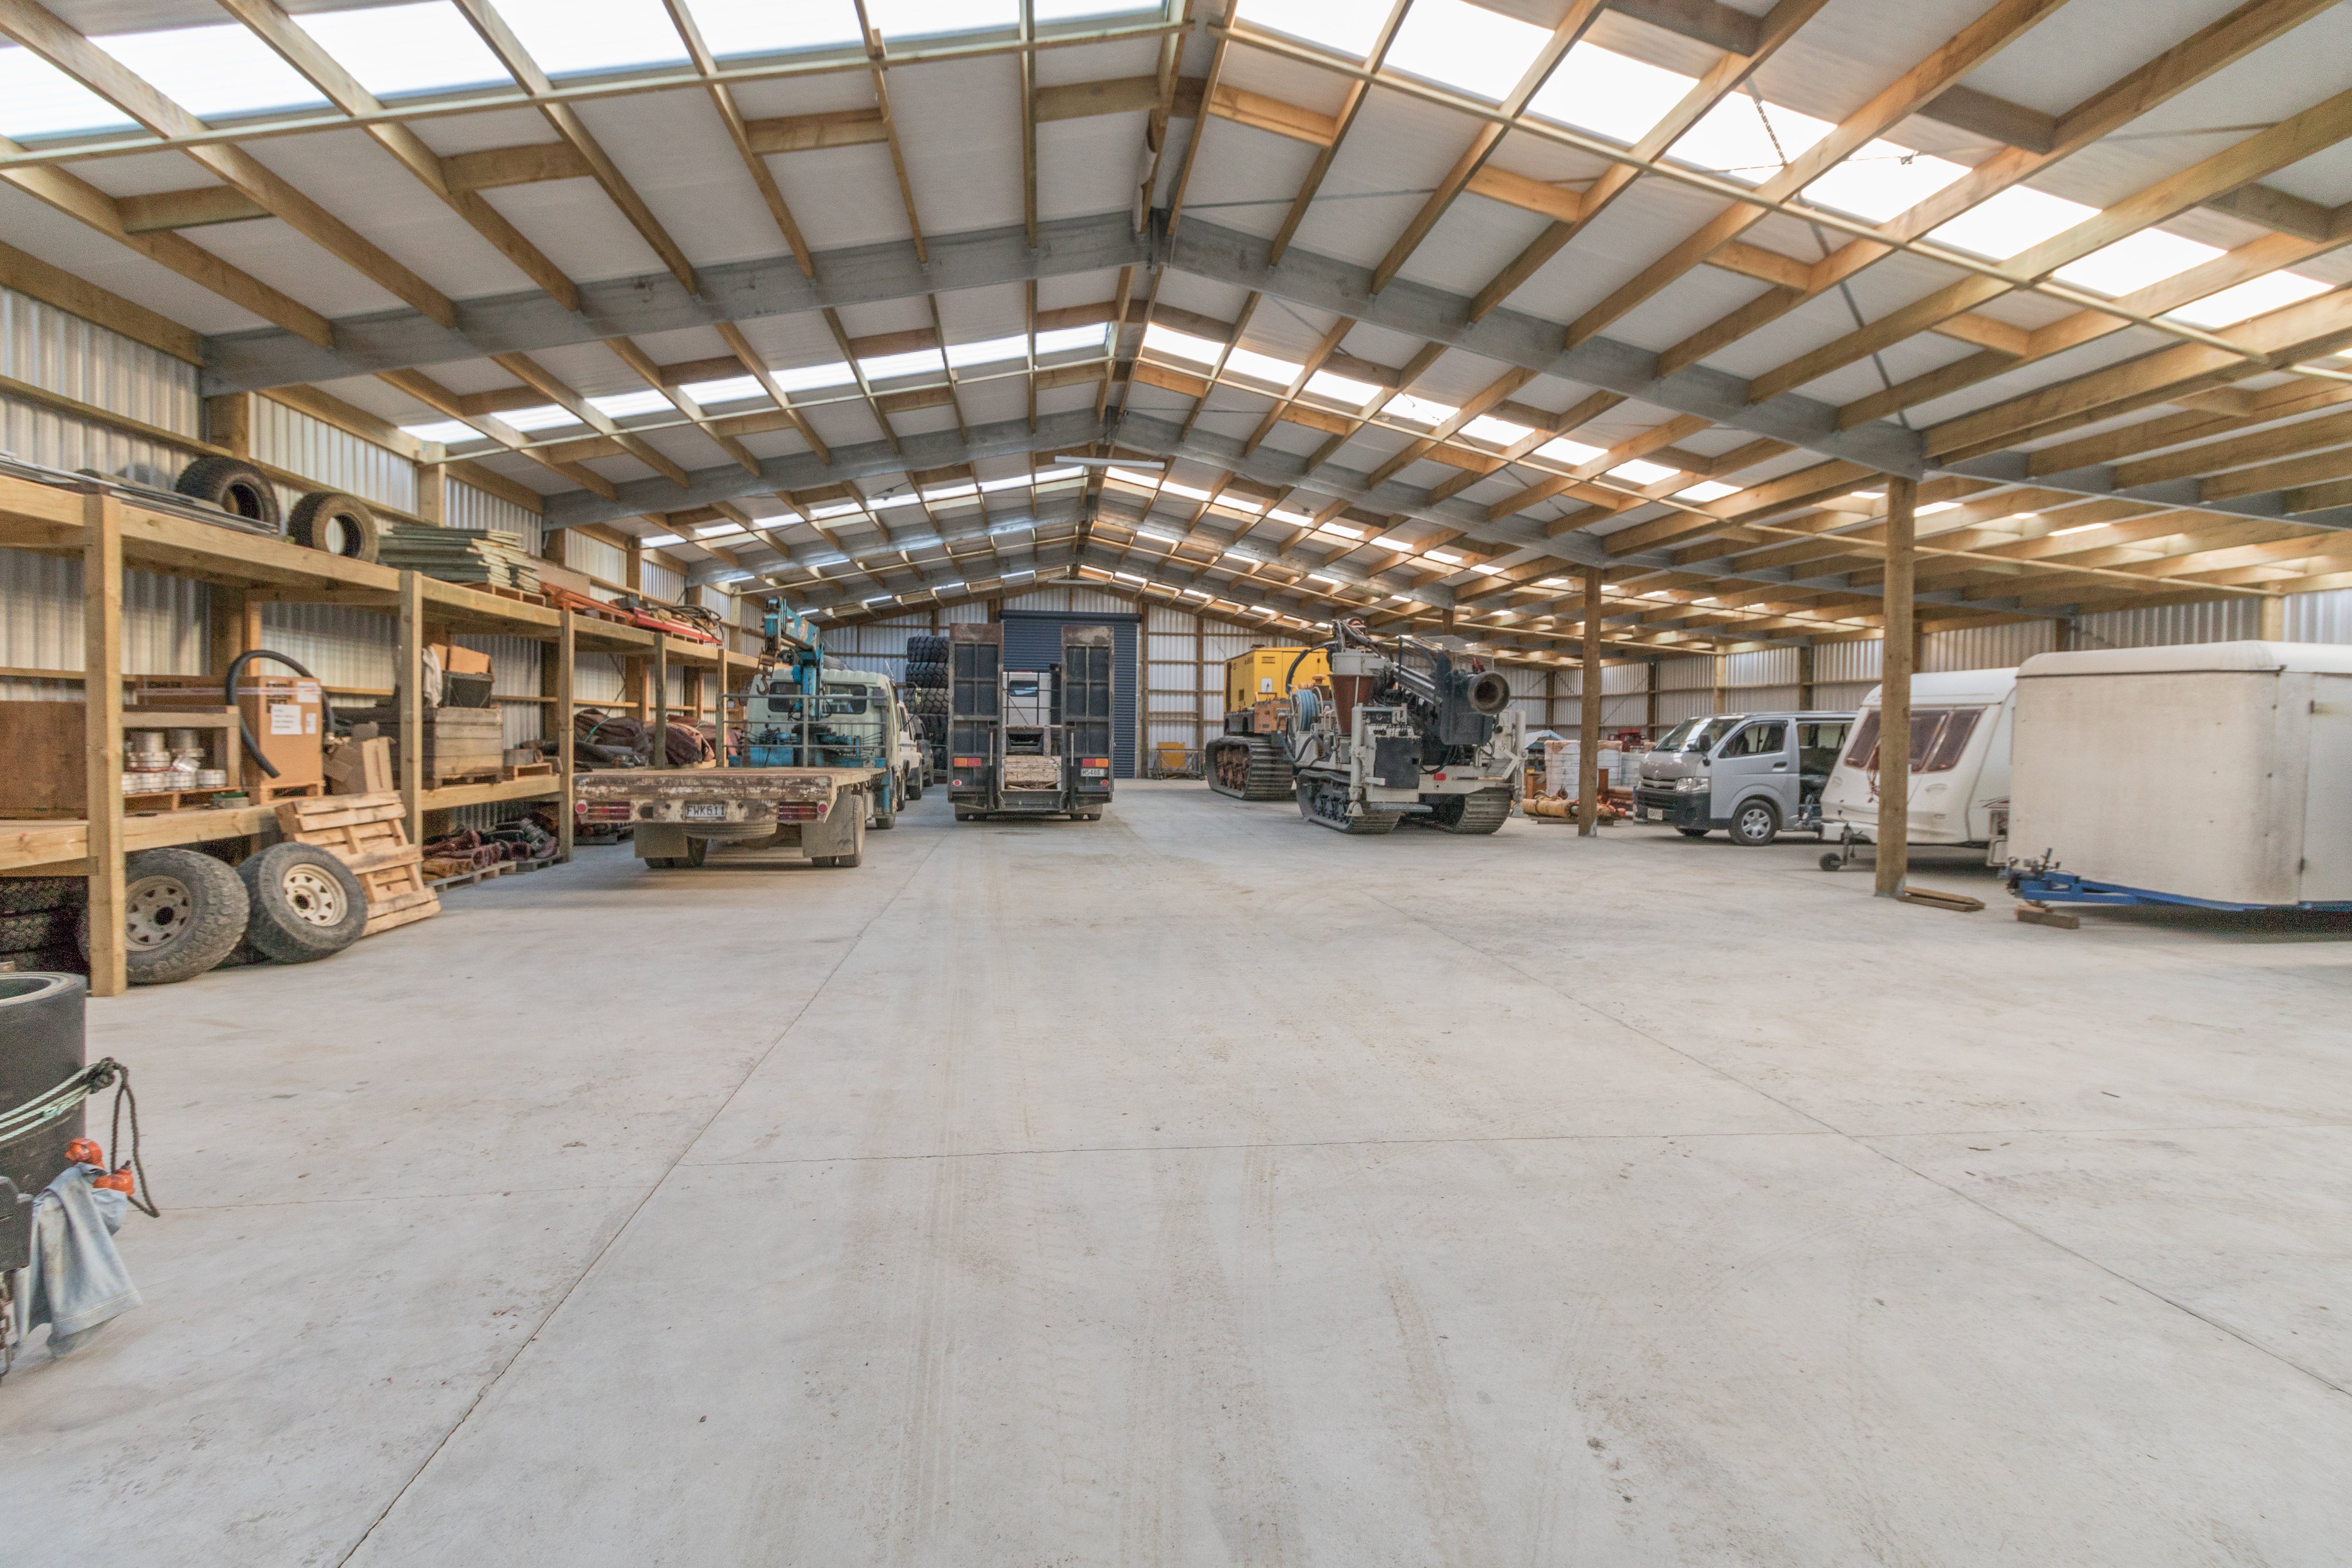 Protect your farm machinery and equipment in a quality workshop shed